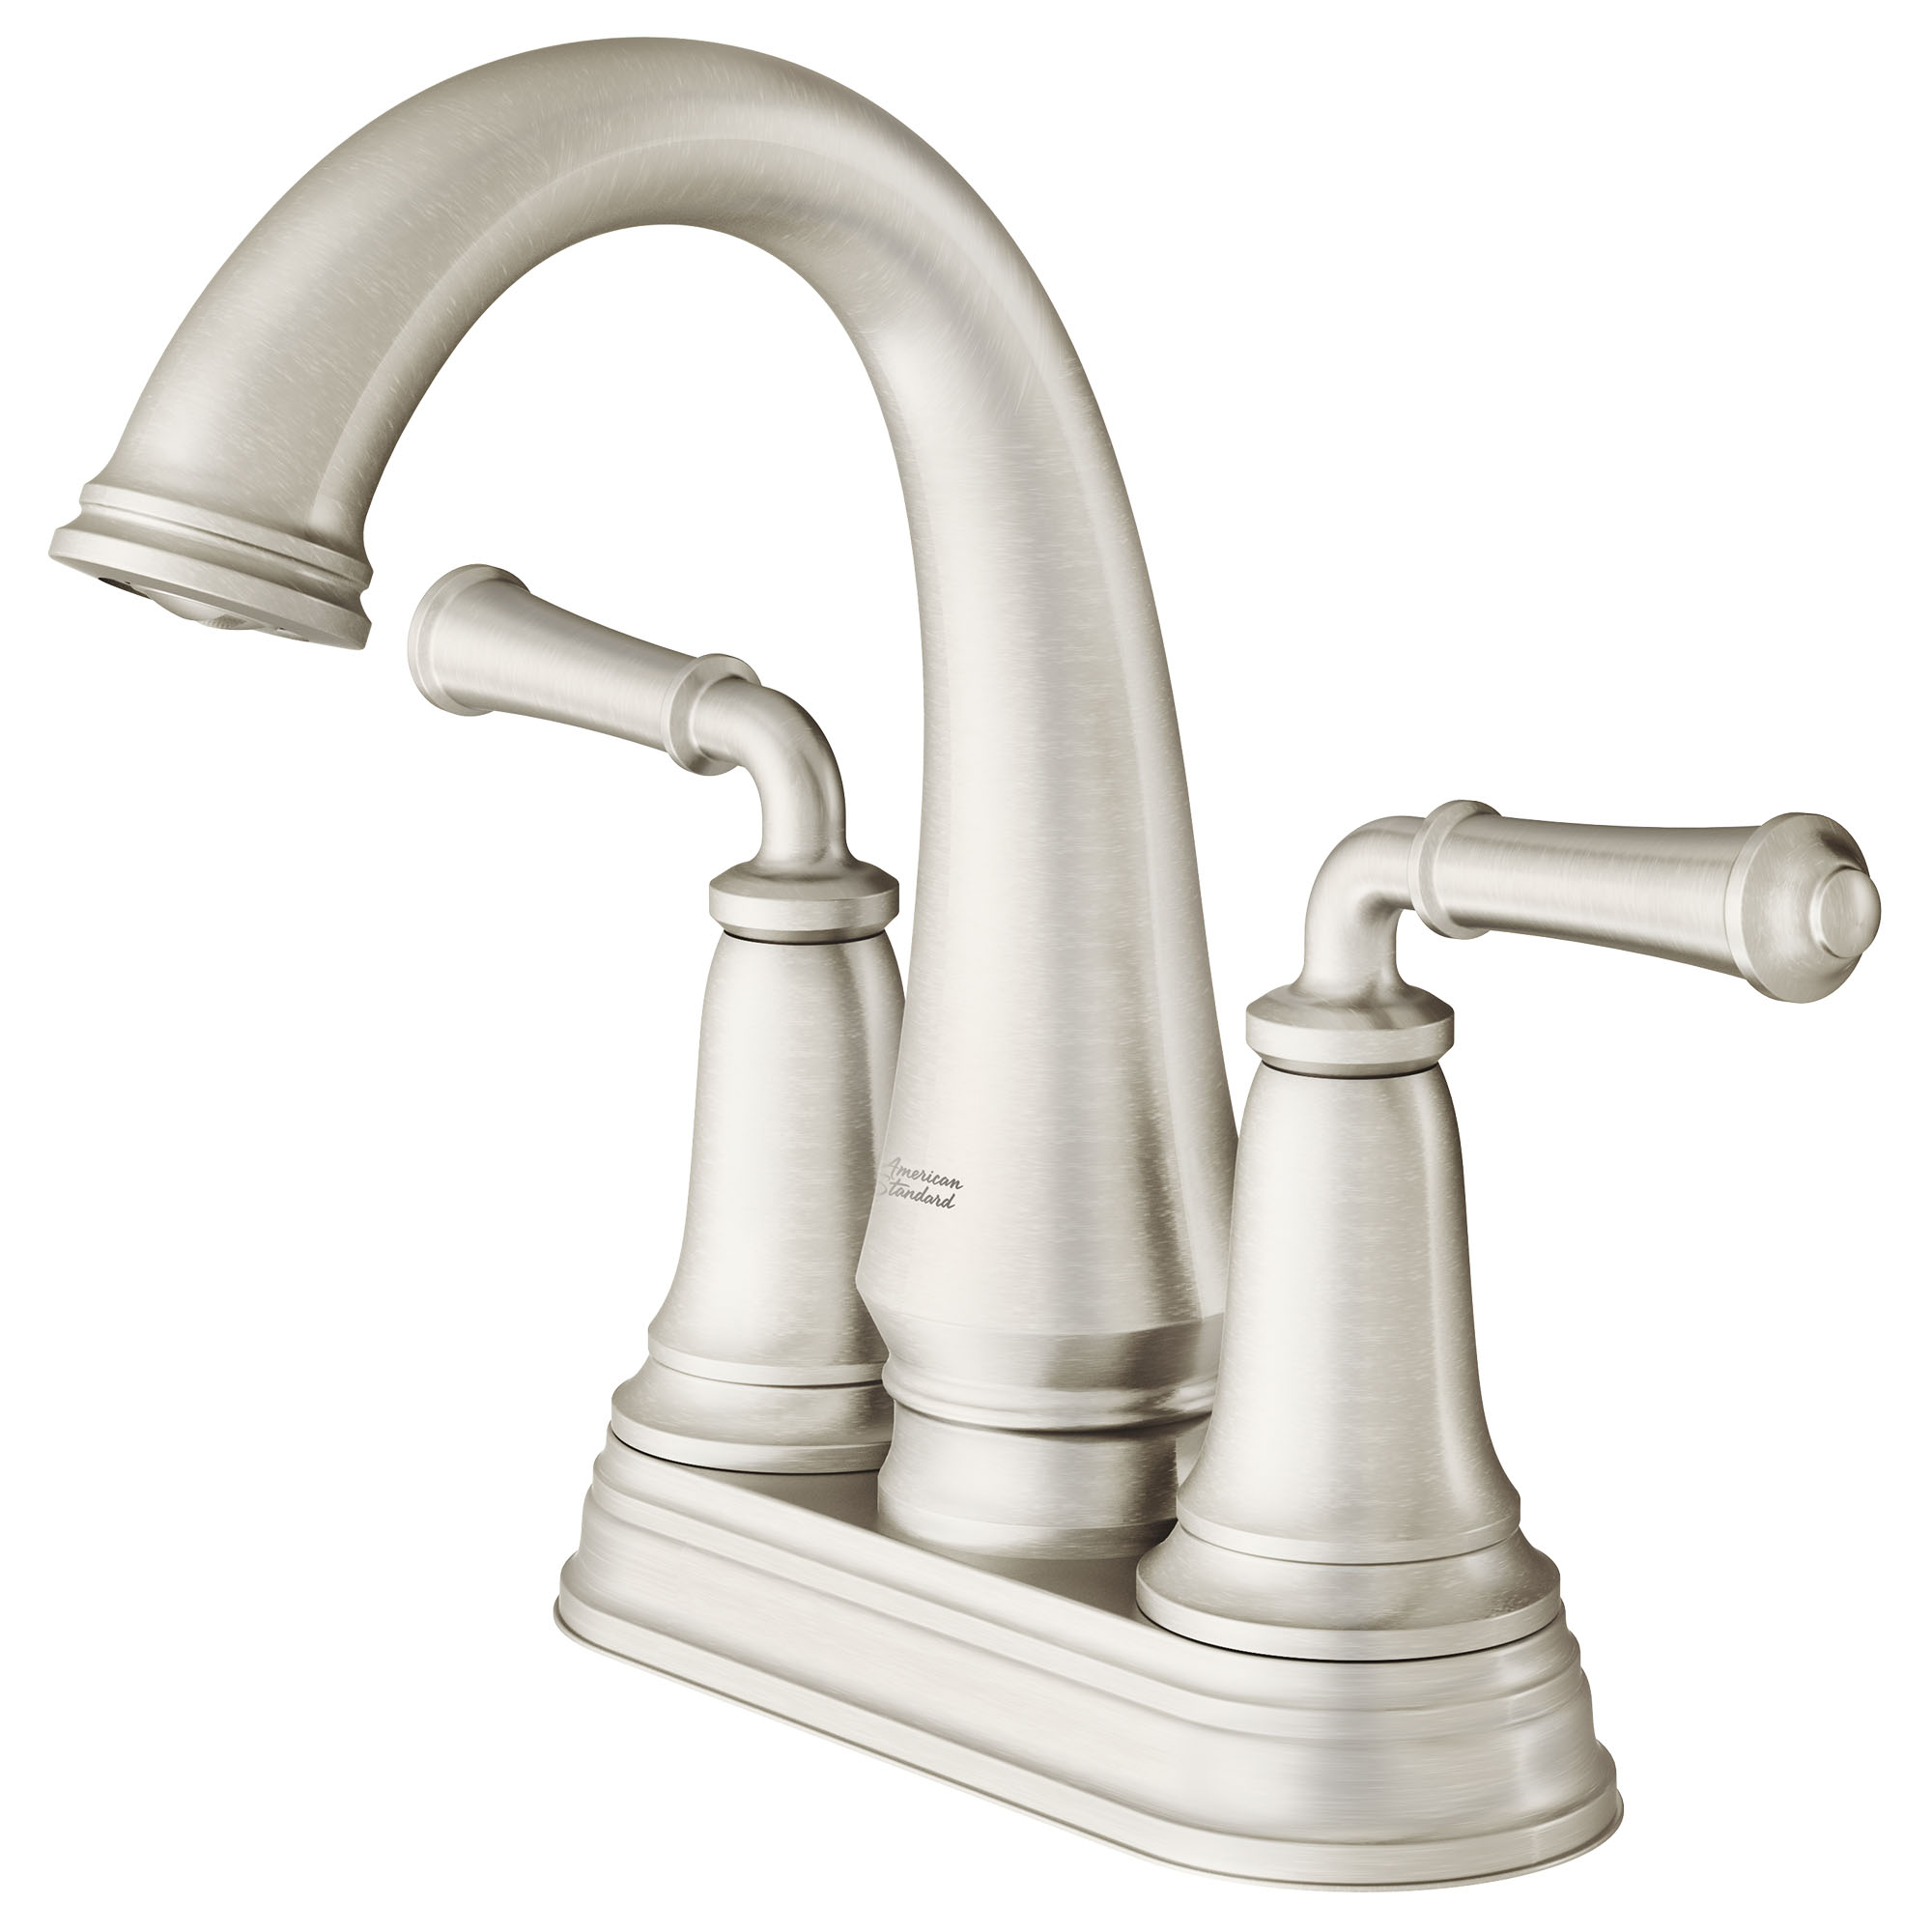 Delancey™ 4-Inch Centerset 2-Handle Bathroom Faucet 1.2gpm/4.5 L/min With Lever Handles